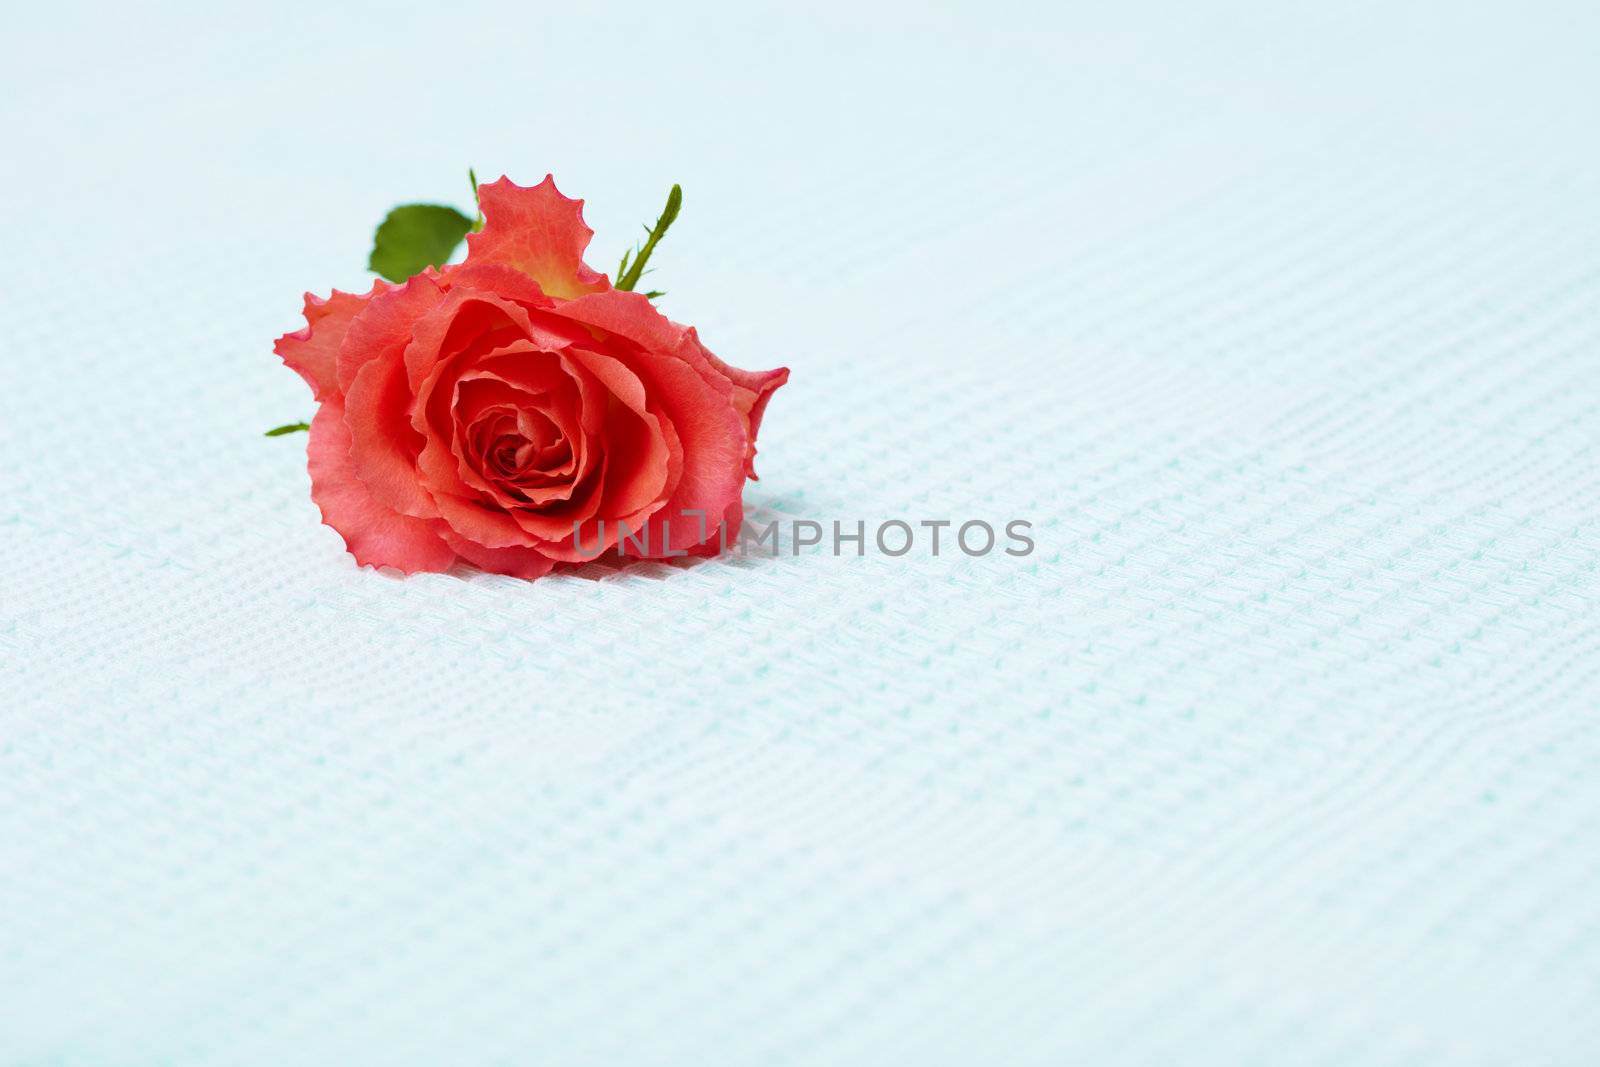 Lone red rose on the surface of a blue towel